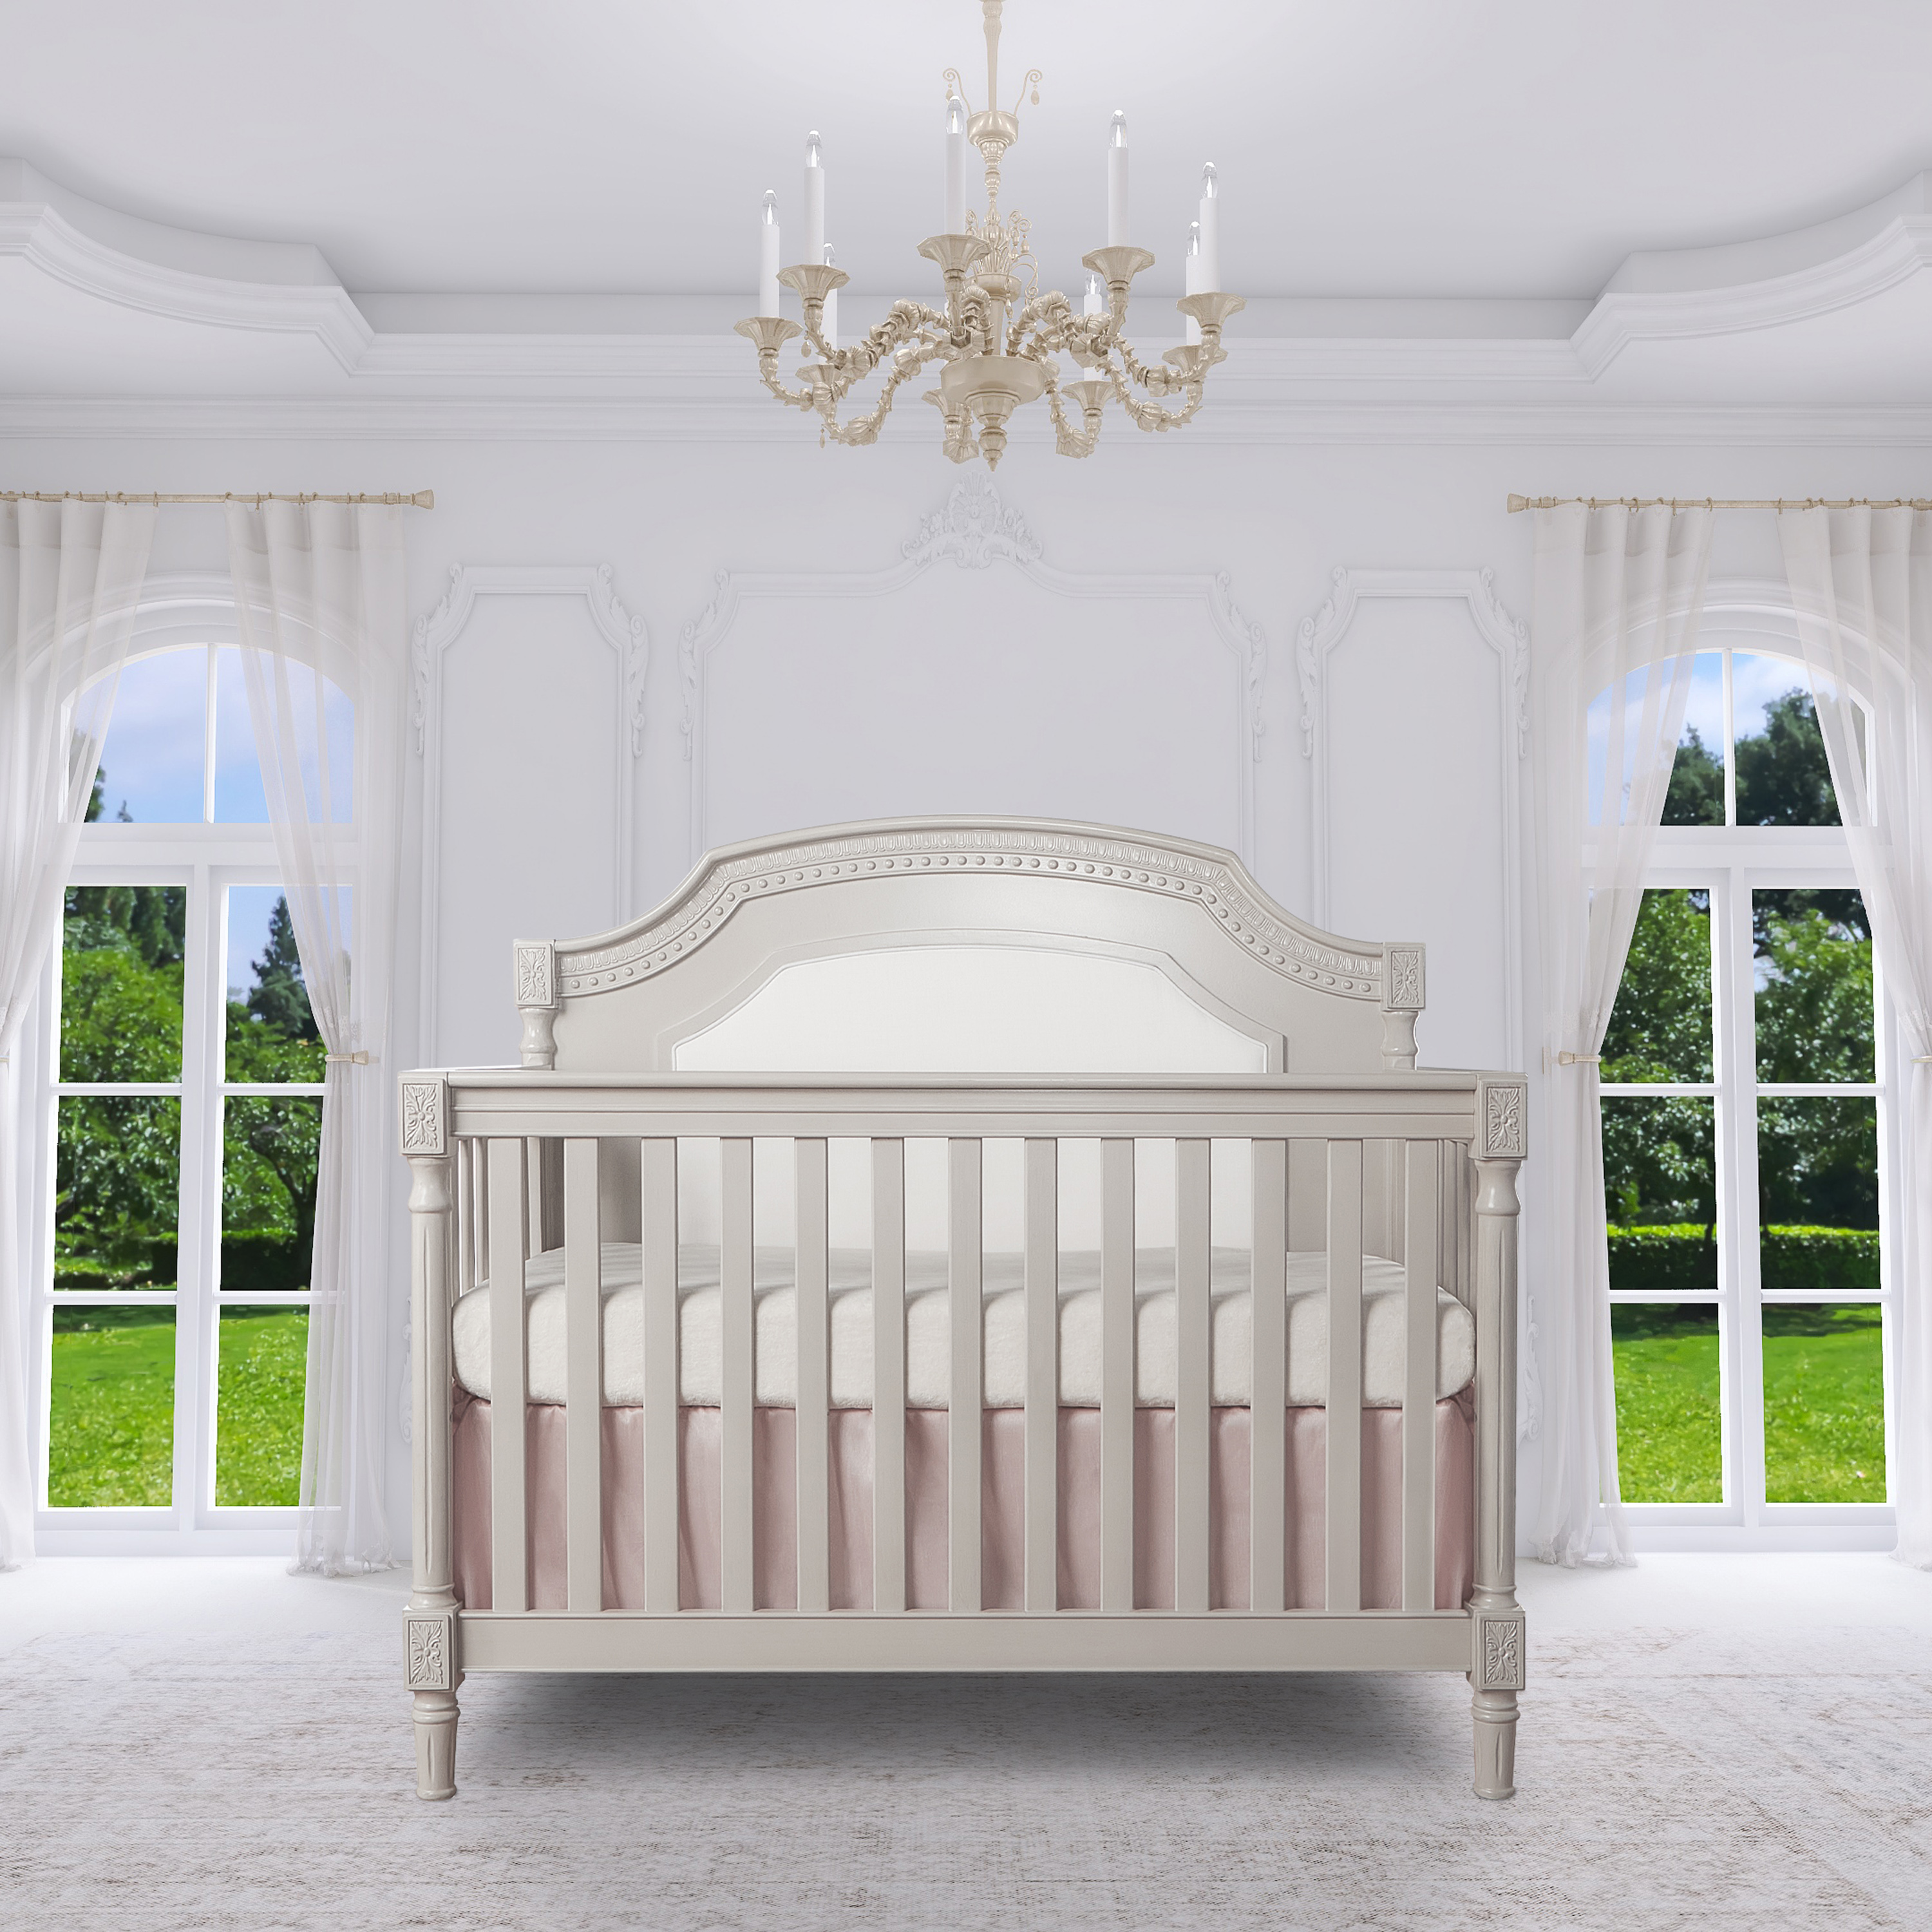 Evolur Nursery Essentials Bundle of Julienne 5-in-1 Convertible Crib, Julienne Double Dresser & London Upholstered 360 Swivel Glider, with a Premium Dream On Me Crib Mattress - image 3 of 11